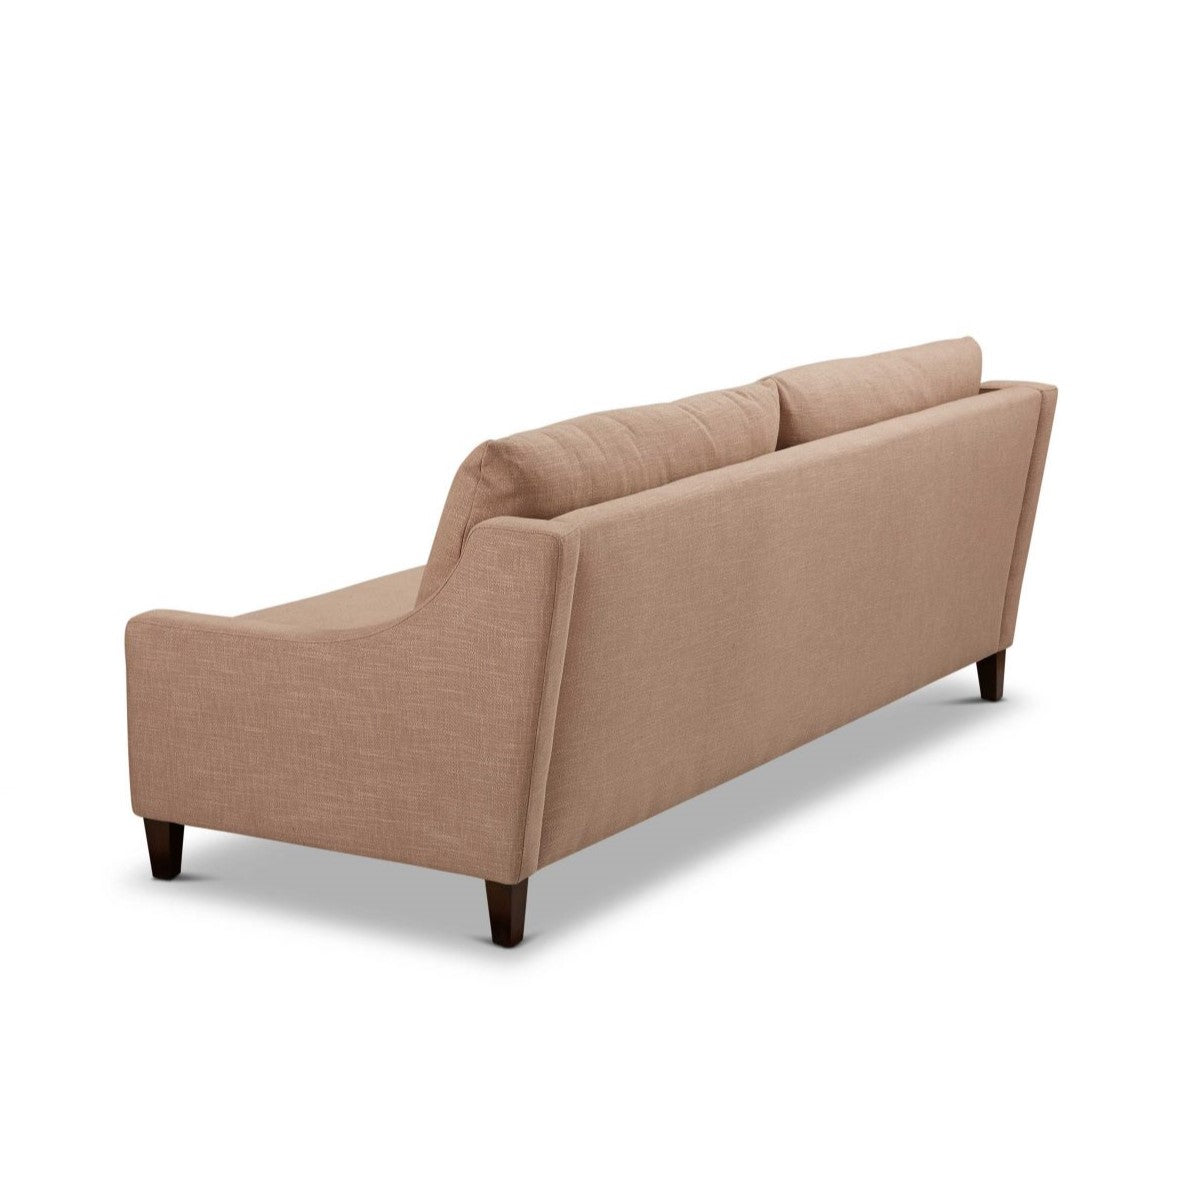 Tasman Sofa by Molmic available from Make Your House A Home, Furniture Store located in Bendigo, Victoria. Australian Made in Melbourne.